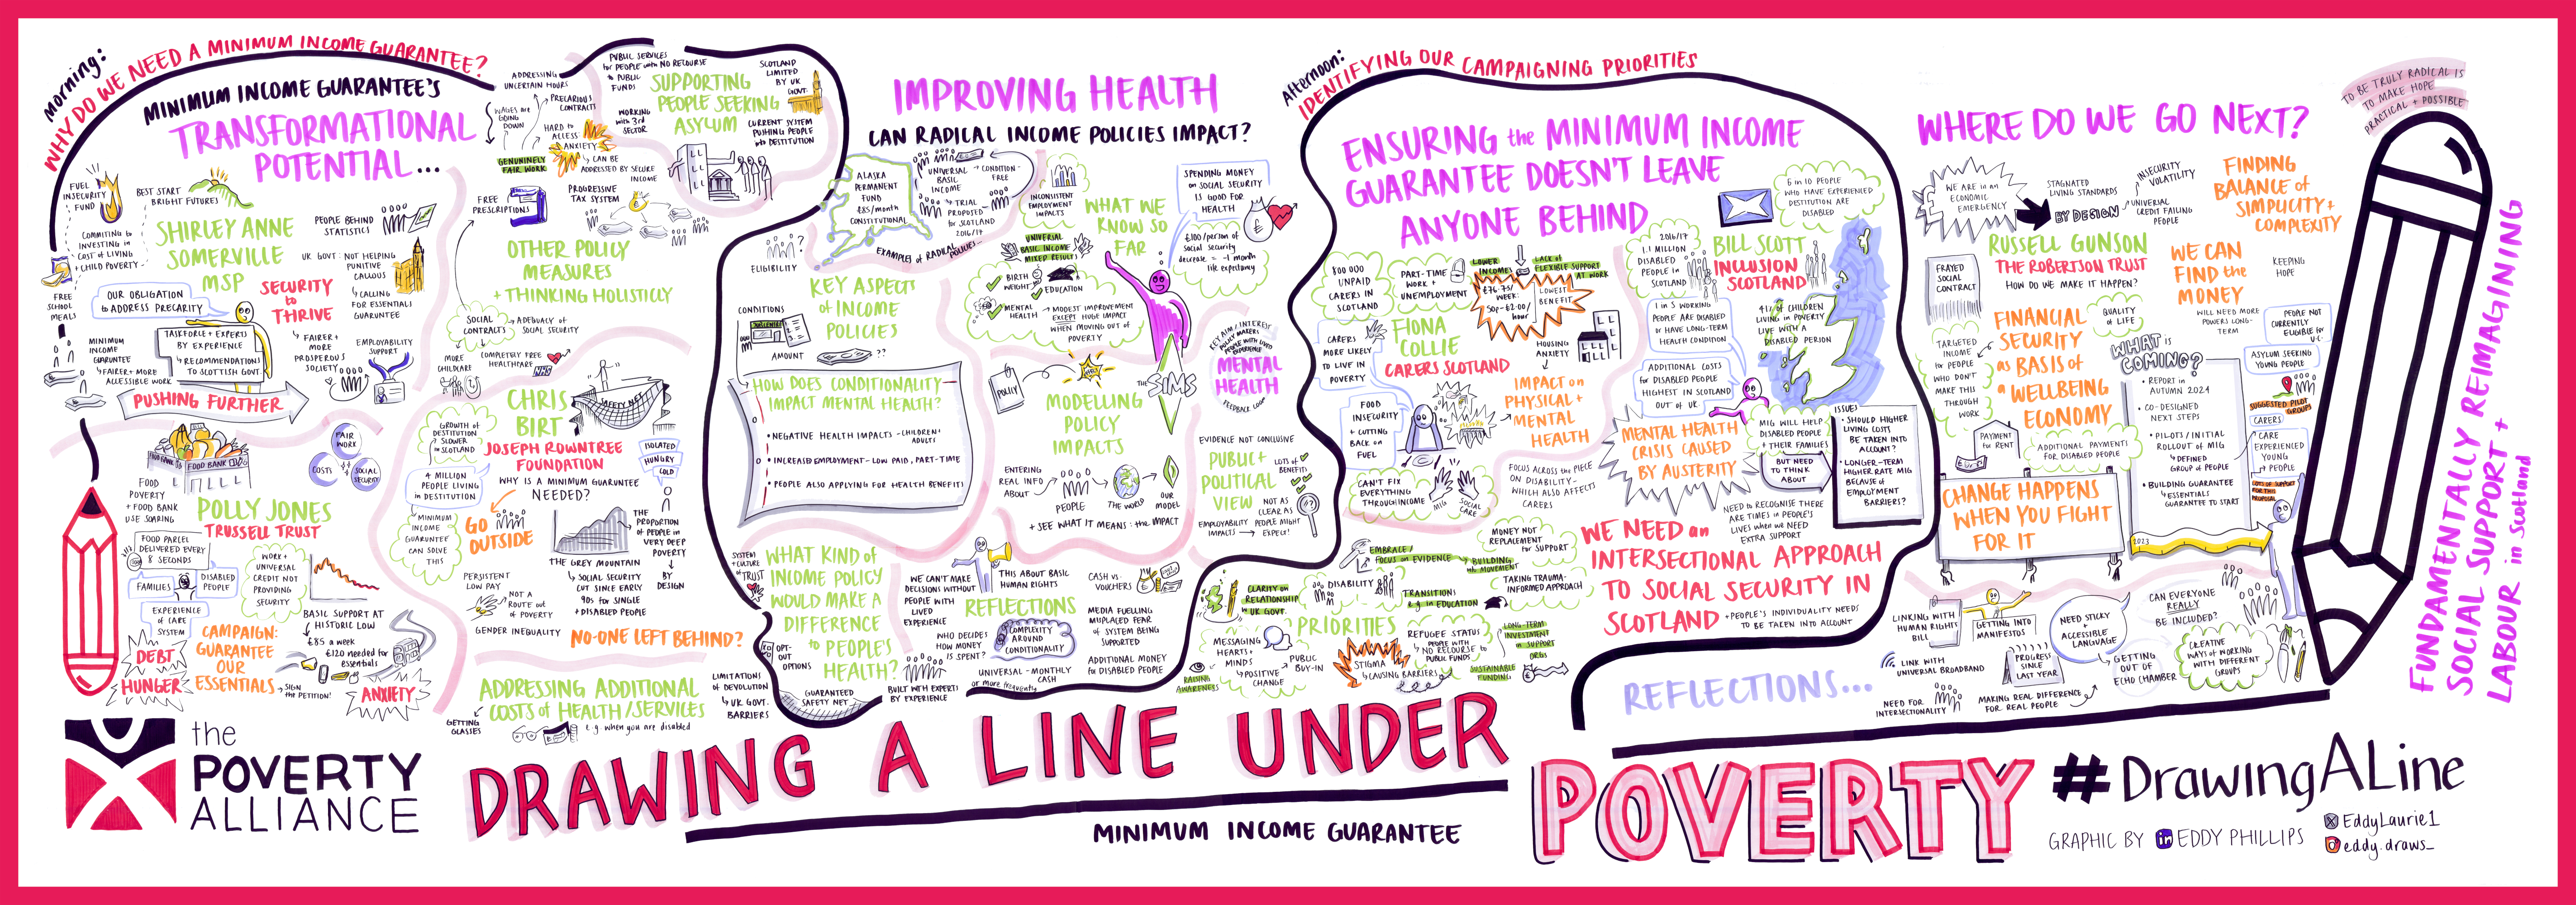 A graphic recording of the Poverty Alliance Conference 2023 by Eddy Phillips of